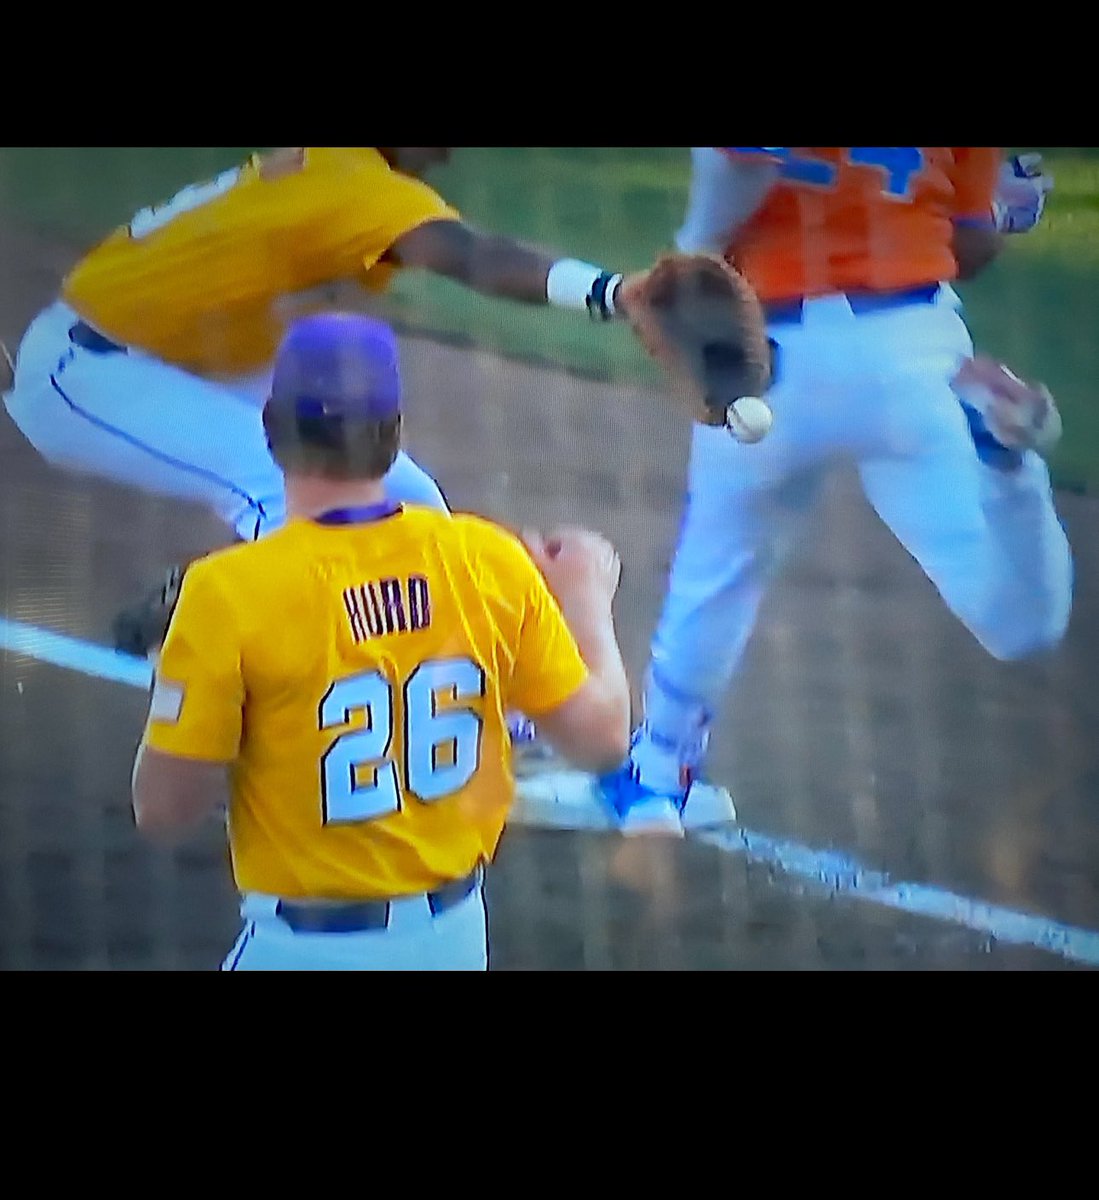 Kid plays the ball incorrectly and you bail him out with an interference call and the runner never touches him nor was the throw in time. Game changing call and the ump should be ashamed #ncaa #CollegeWorldSeries